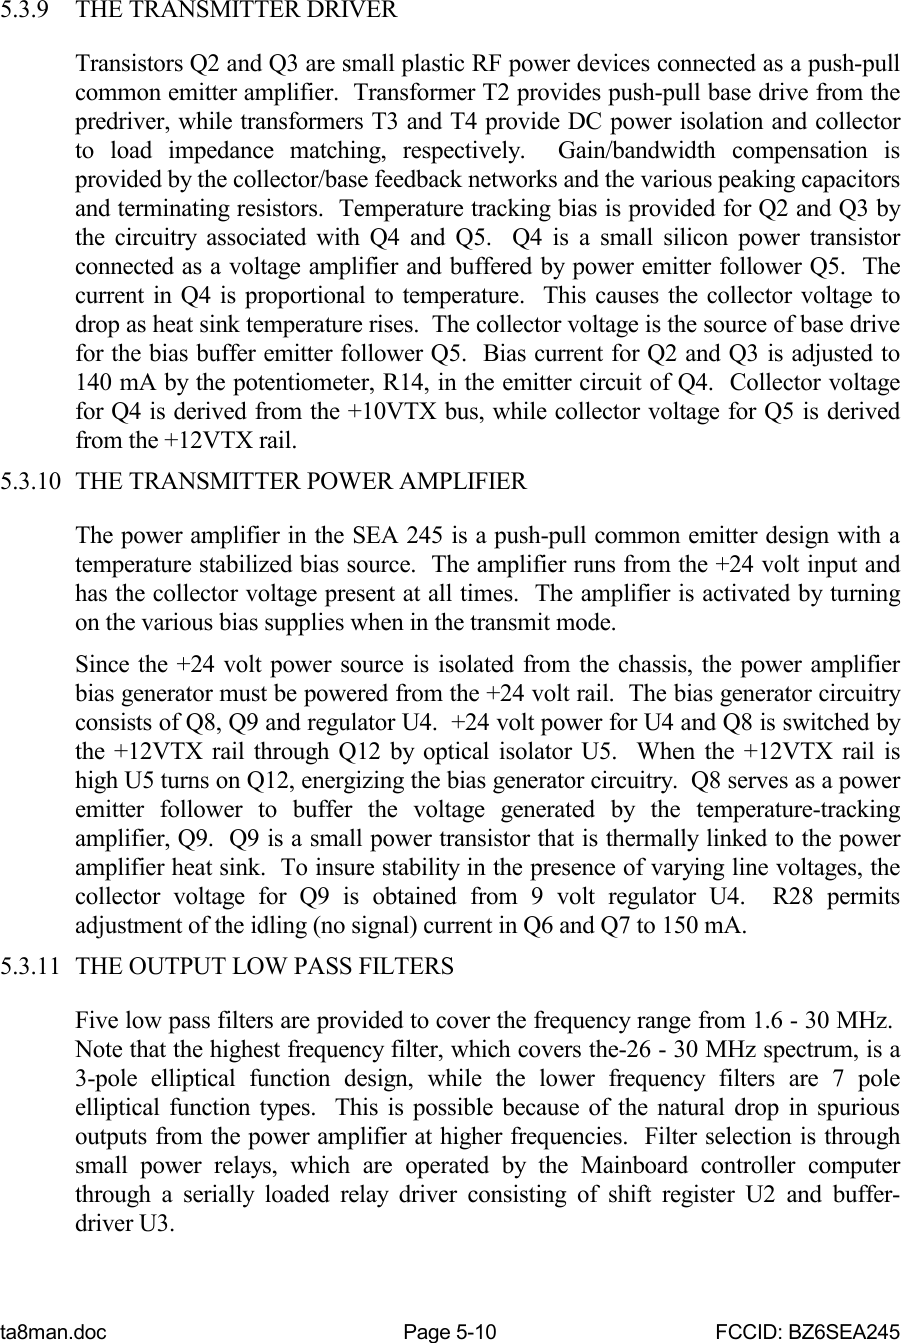 ta8man.doc Page 5-10 FCCID: BZ6SEA2455.3.9 THE TRANSMITTER DRIVERTransistors Q2 and Q3 are small plastic RF power devices connected as a push-pullcommon emitter amplifier.  Transformer T2 provides push-pull base drive from thepredriver, while transformers T3 and T4 provide DC power isolation and collectorto load impedance matching, respectively.  Gain/bandwidth compensation isprovided by the collector/base feedback networks and the various peaking capacitorsand terminating resistors.  Temperature tracking bias is provided for Q2 and Q3 bythe circuitry associated with Q4 and Q5.  Q4 is a small silicon power transistorconnected as a voltage amplifier and buffered by power emitter follower Q5.  Thecurrent in Q4 is proportional to temperature.  This causes the collector voltage todrop as heat sink temperature rises.  The collector voltage is the source of base drivefor the bias buffer emitter follower Q5.  Bias current for Q2 and Q3 is adjusted to140 mA by the potentiometer, R14, in the emitter circuit of Q4.  Collector voltagefor Q4 is derived from the +10VTX bus, while collector voltage for Q5 is derivedfrom the +12VTX rail.5.3.10 THE TRANSMITTER POWER AMPLIFIERThe power amplifier in the SEA 245 is a push-pull common emitter design with atemperature stabilized bias source.  The amplifier runs from the +24 volt input andhas the collector voltage present at all times.  The amplifier is activated by turningon the various bias supplies when in the transmit mode.Since the +24 volt power source is isolated from the chassis, the power amplifierbias generator must be powered from the +24 volt rail.  The bias generator circuitryconsists of Q8, Q9 and regulator U4.  +24 volt power for U4 and Q8 is switched bythe +12VTX rail through Q12 by optical isolator U5.  When the +12VTX rail ishigh U5 turns on Q12, energizing the bias generator circuitry.  Q8 serves as a poweremitter follower to buffer the voltage generated by the temperature-trackingamplifier, Q9.  Q9 is a small power transistor that is thermally linked to the poweramplifier heat sink.  To insure stability in the presence of varying line voltages, thecollector voltage for Q9 is obtained from 9 volt regulator U4.  R28 permitsadjustment of the idling (no signal) current in Q6 and Q7 to 150 mA.5.3.11 THE OUTPUT LOW PASS FILTERSFive low pass filters are provided to cover the frequency range from 1.6 - 30 MHz. Note that the highest frequency filter, which covers the-26 - 30 MHz spectrum, is a3-pole elliptical function design, while the lower frequency filters are 7 poleelliptical function types.  This is possible because of the natural drop in spuriousoutputs from the power amplifier at higher frequencies.  Filter selection is throughsmall power relays, which are operated by the Mainboard controller computerthrough a serially loaded relay driver consisting of shift register U2 and buffer-driver U3.